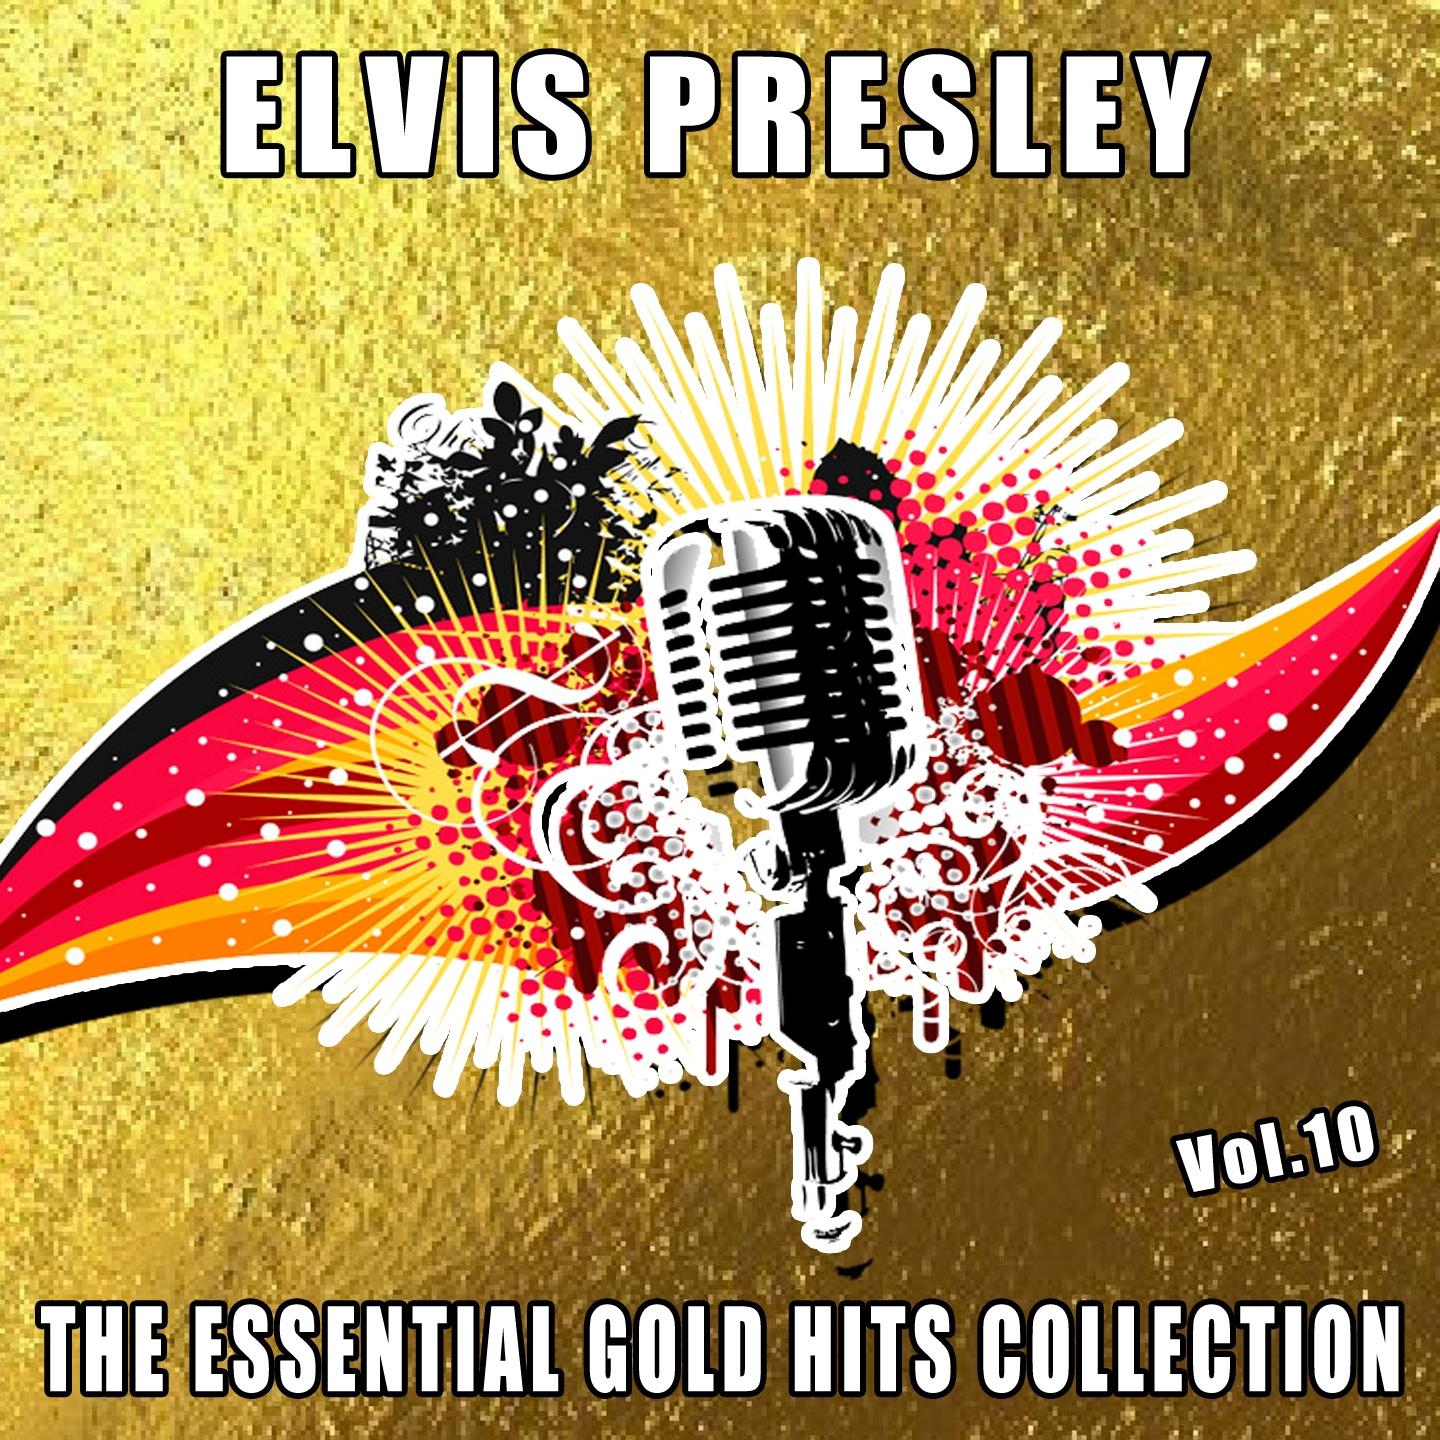 The Essential Gold Hits Collection, Vol. 10